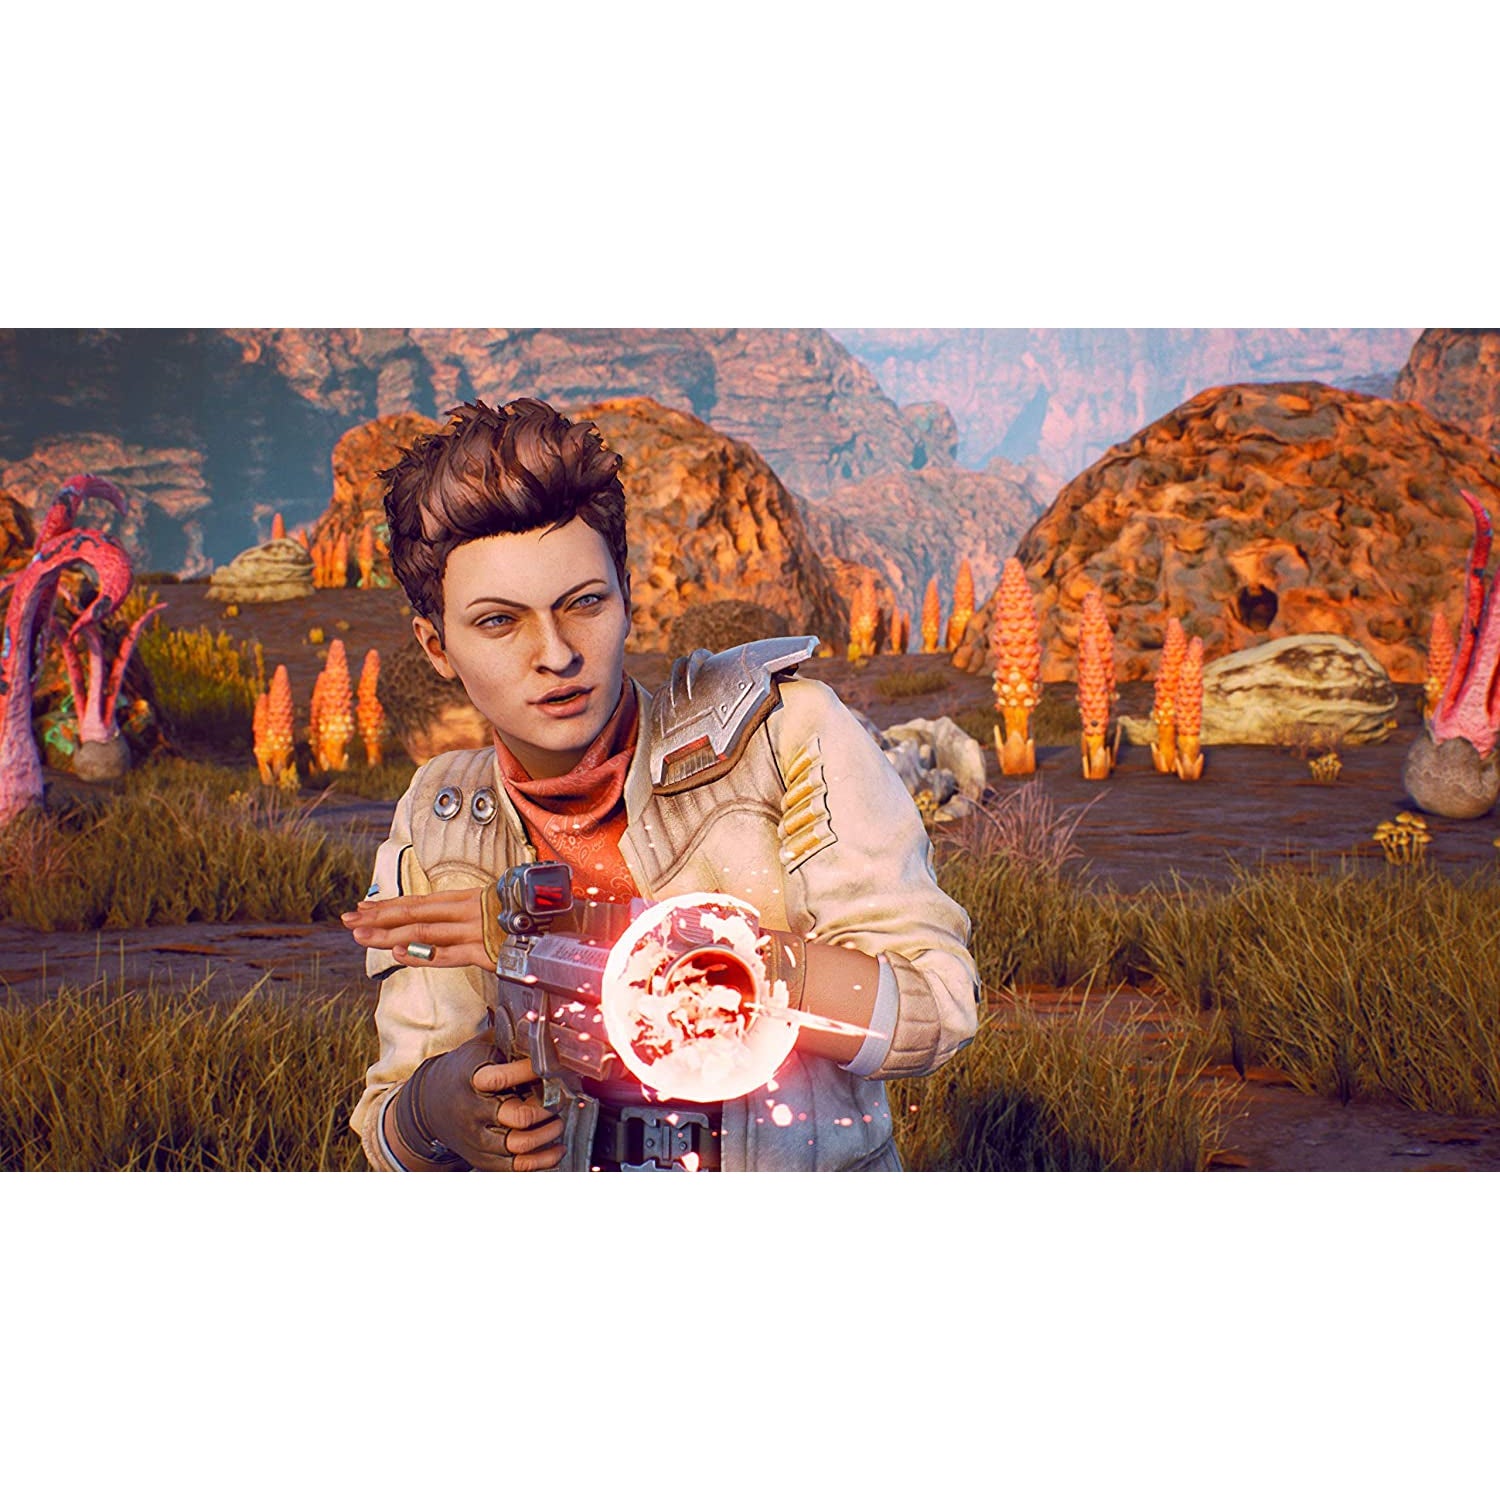 The Outer Worlds (PS4)